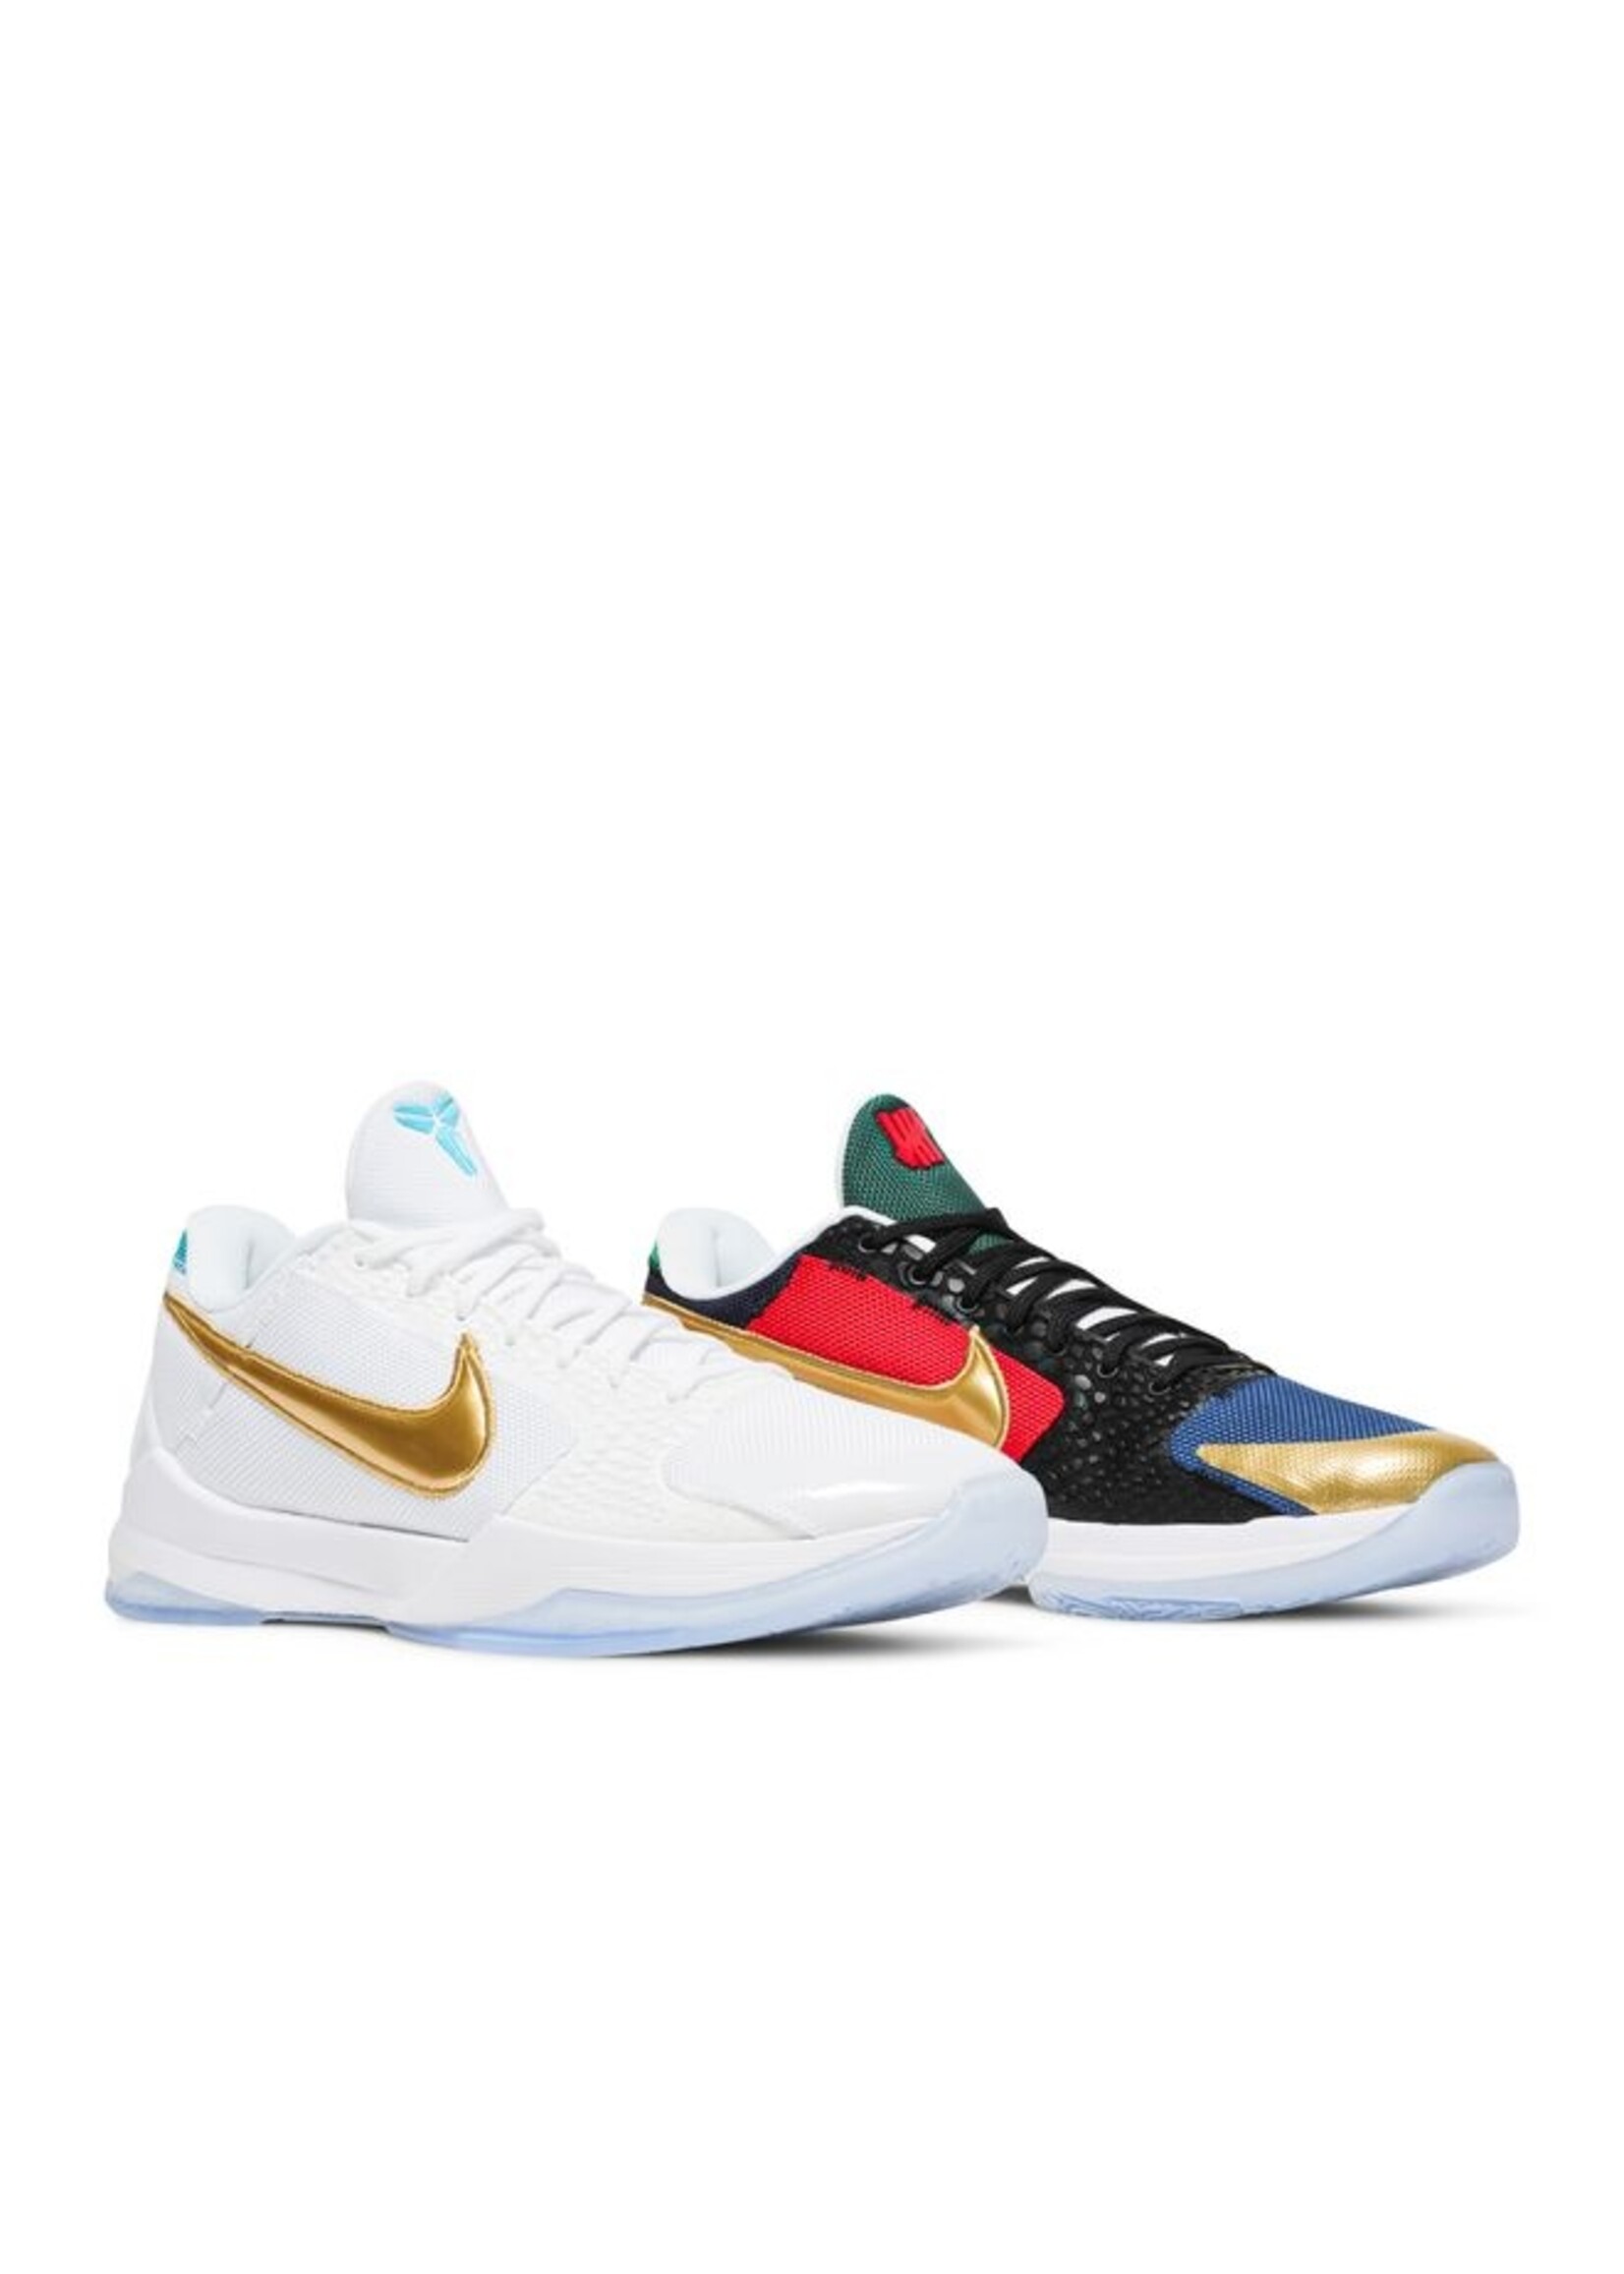 Kobe 5 Protro UNDFTD-Pack - Sole and Laces